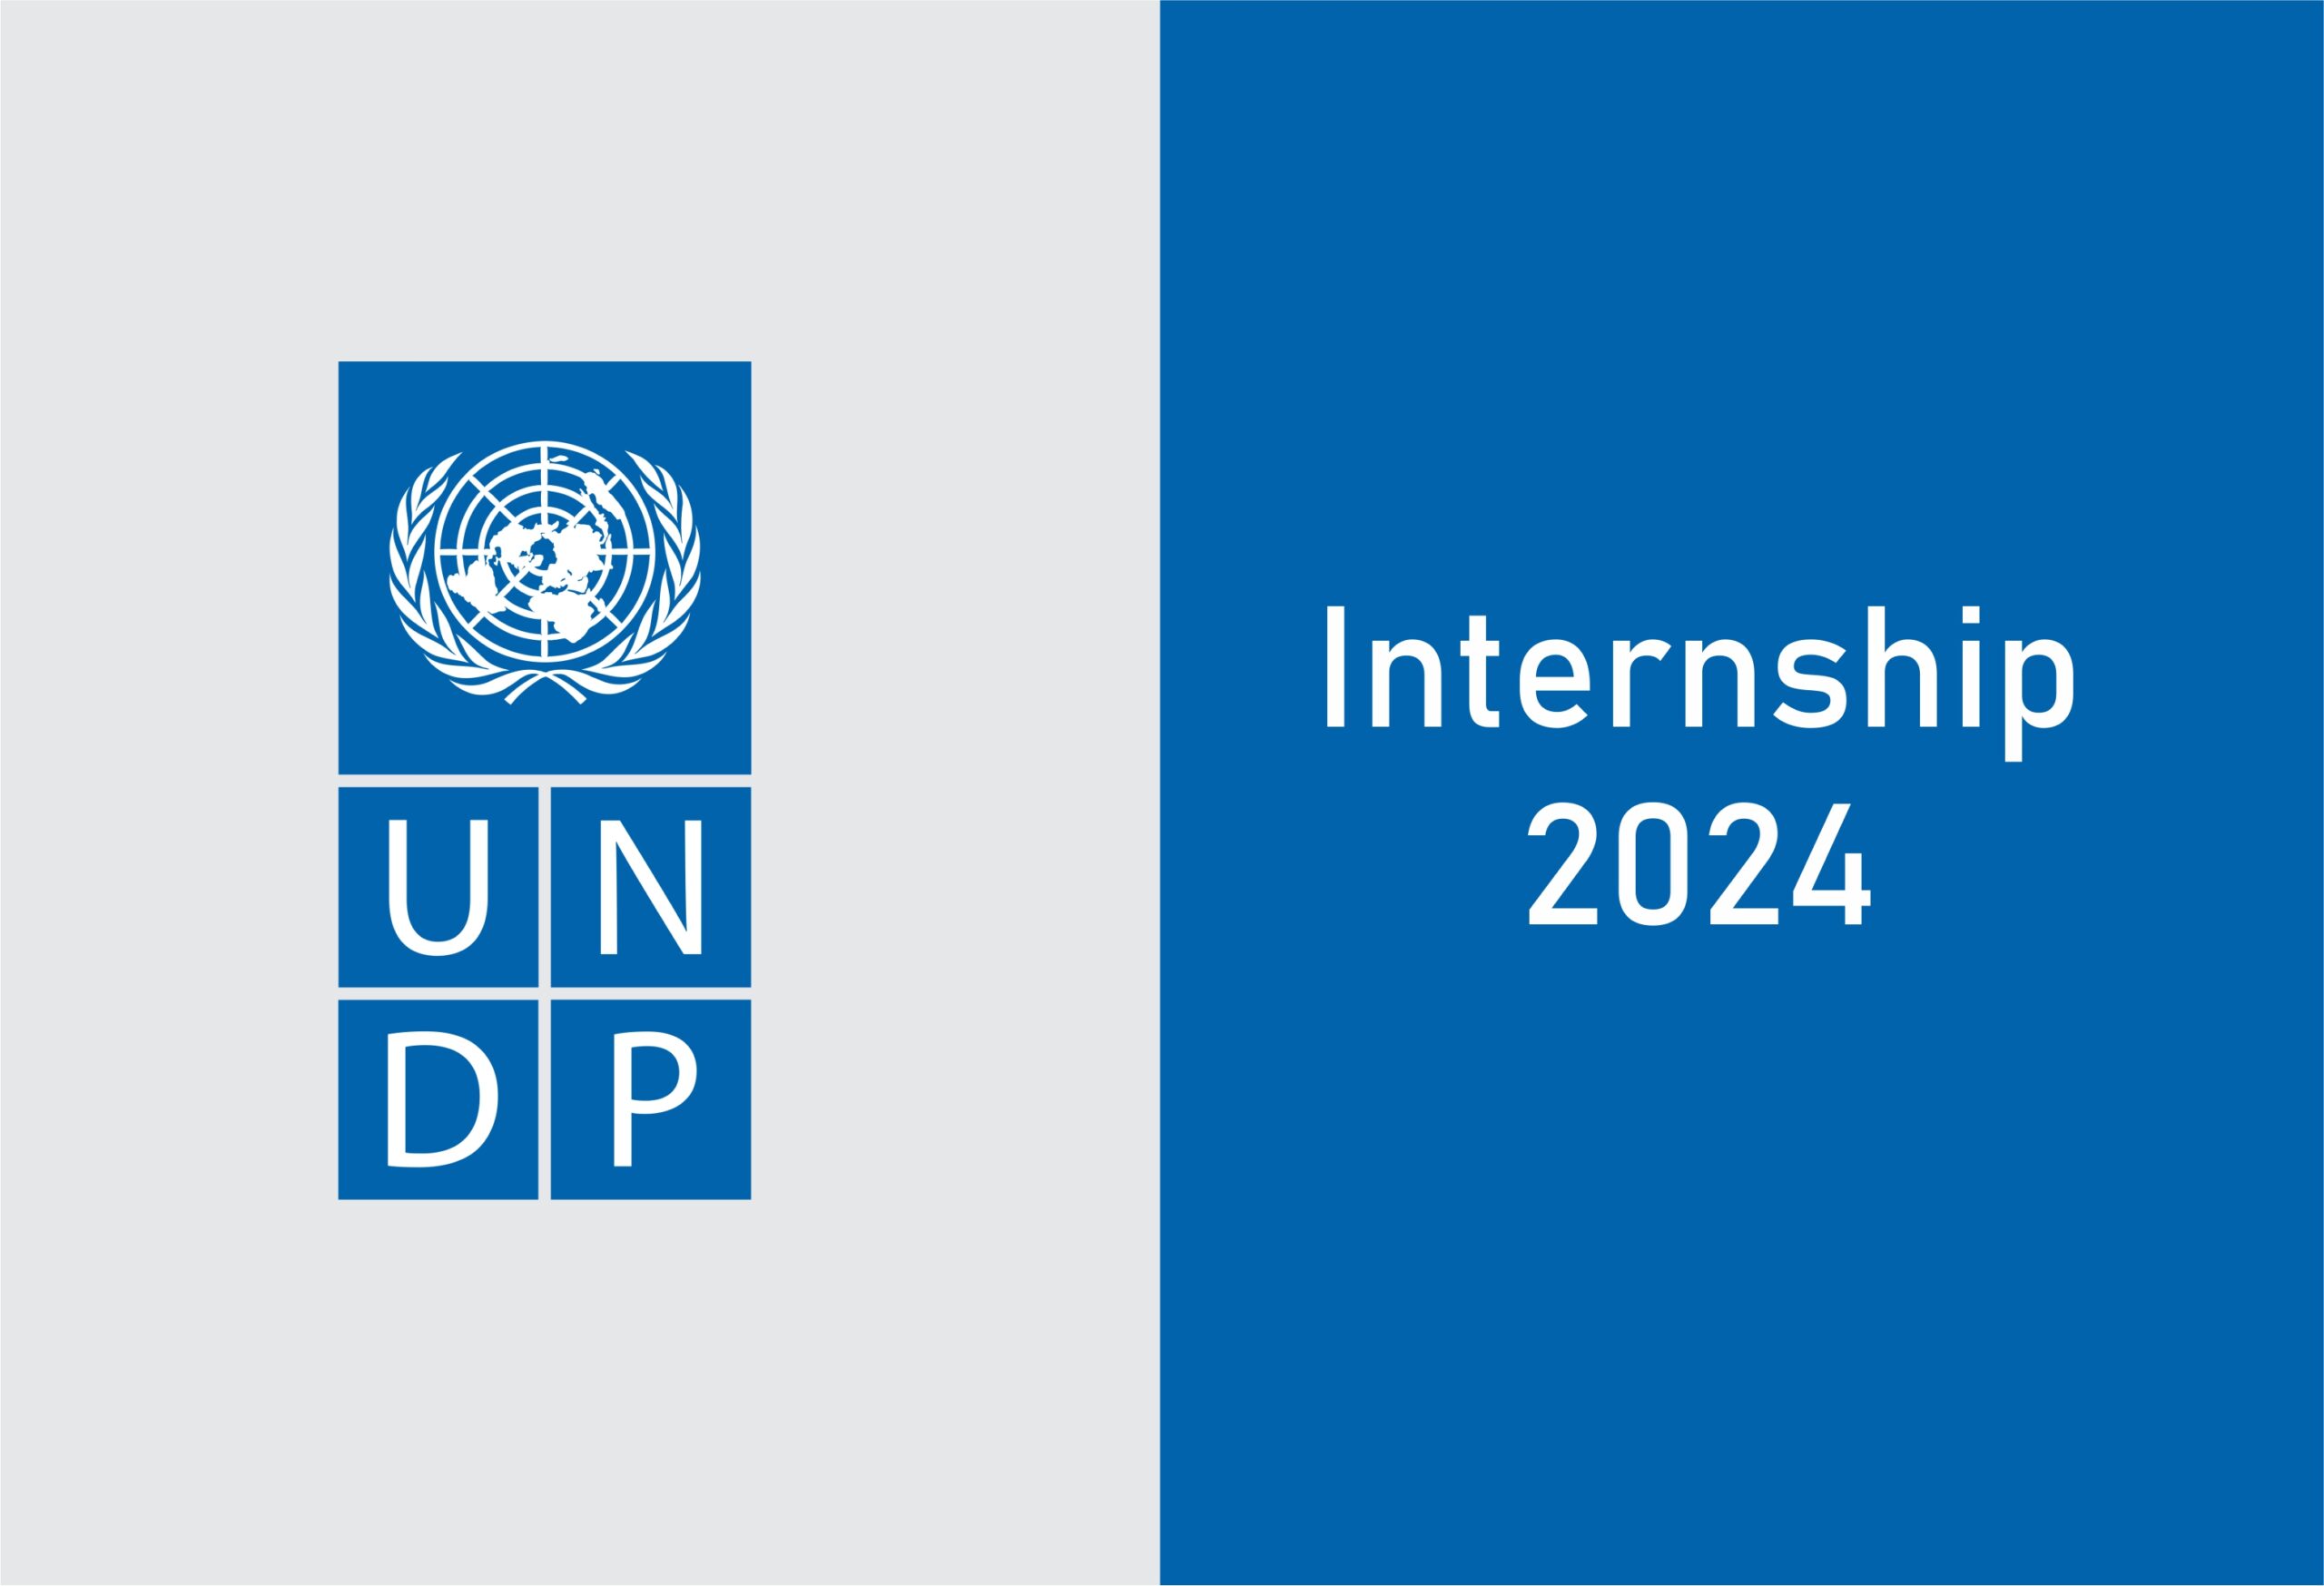 Publications Editor and Writer Interns Needed at UNDP